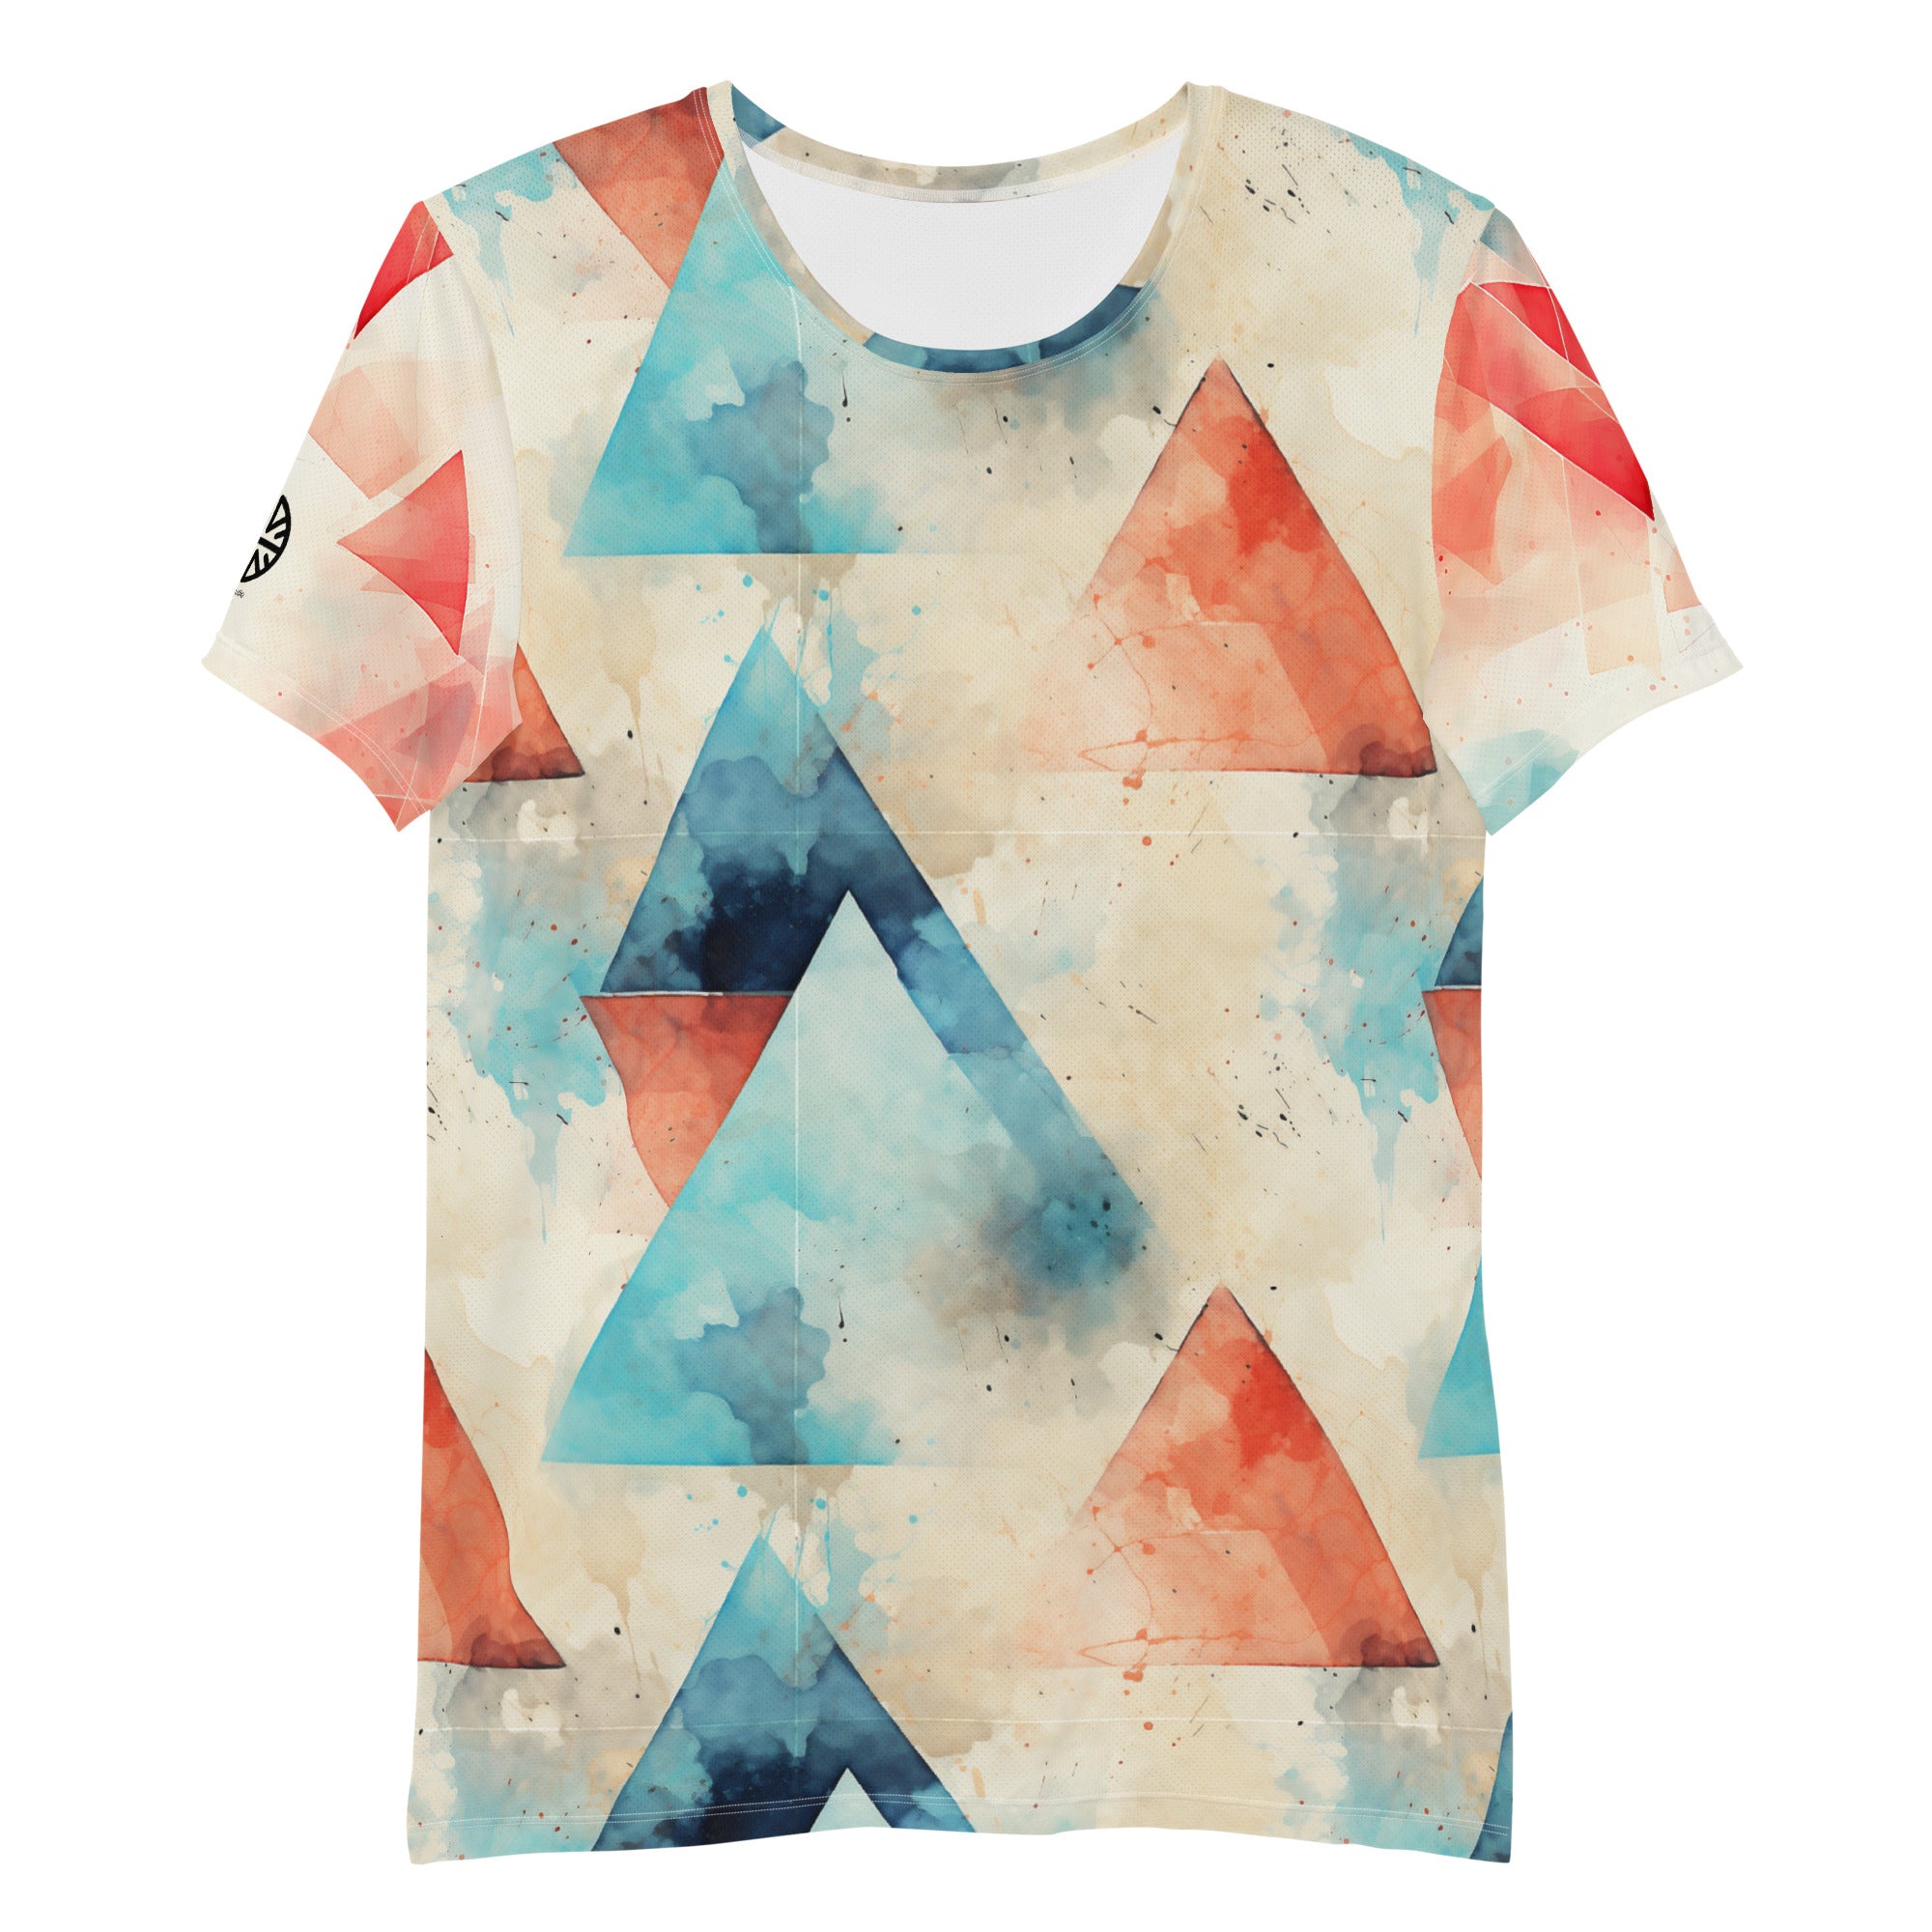 Geometric Elegance in Motion: Men's Athletic T-shirt Adorned with Striking Triangles!